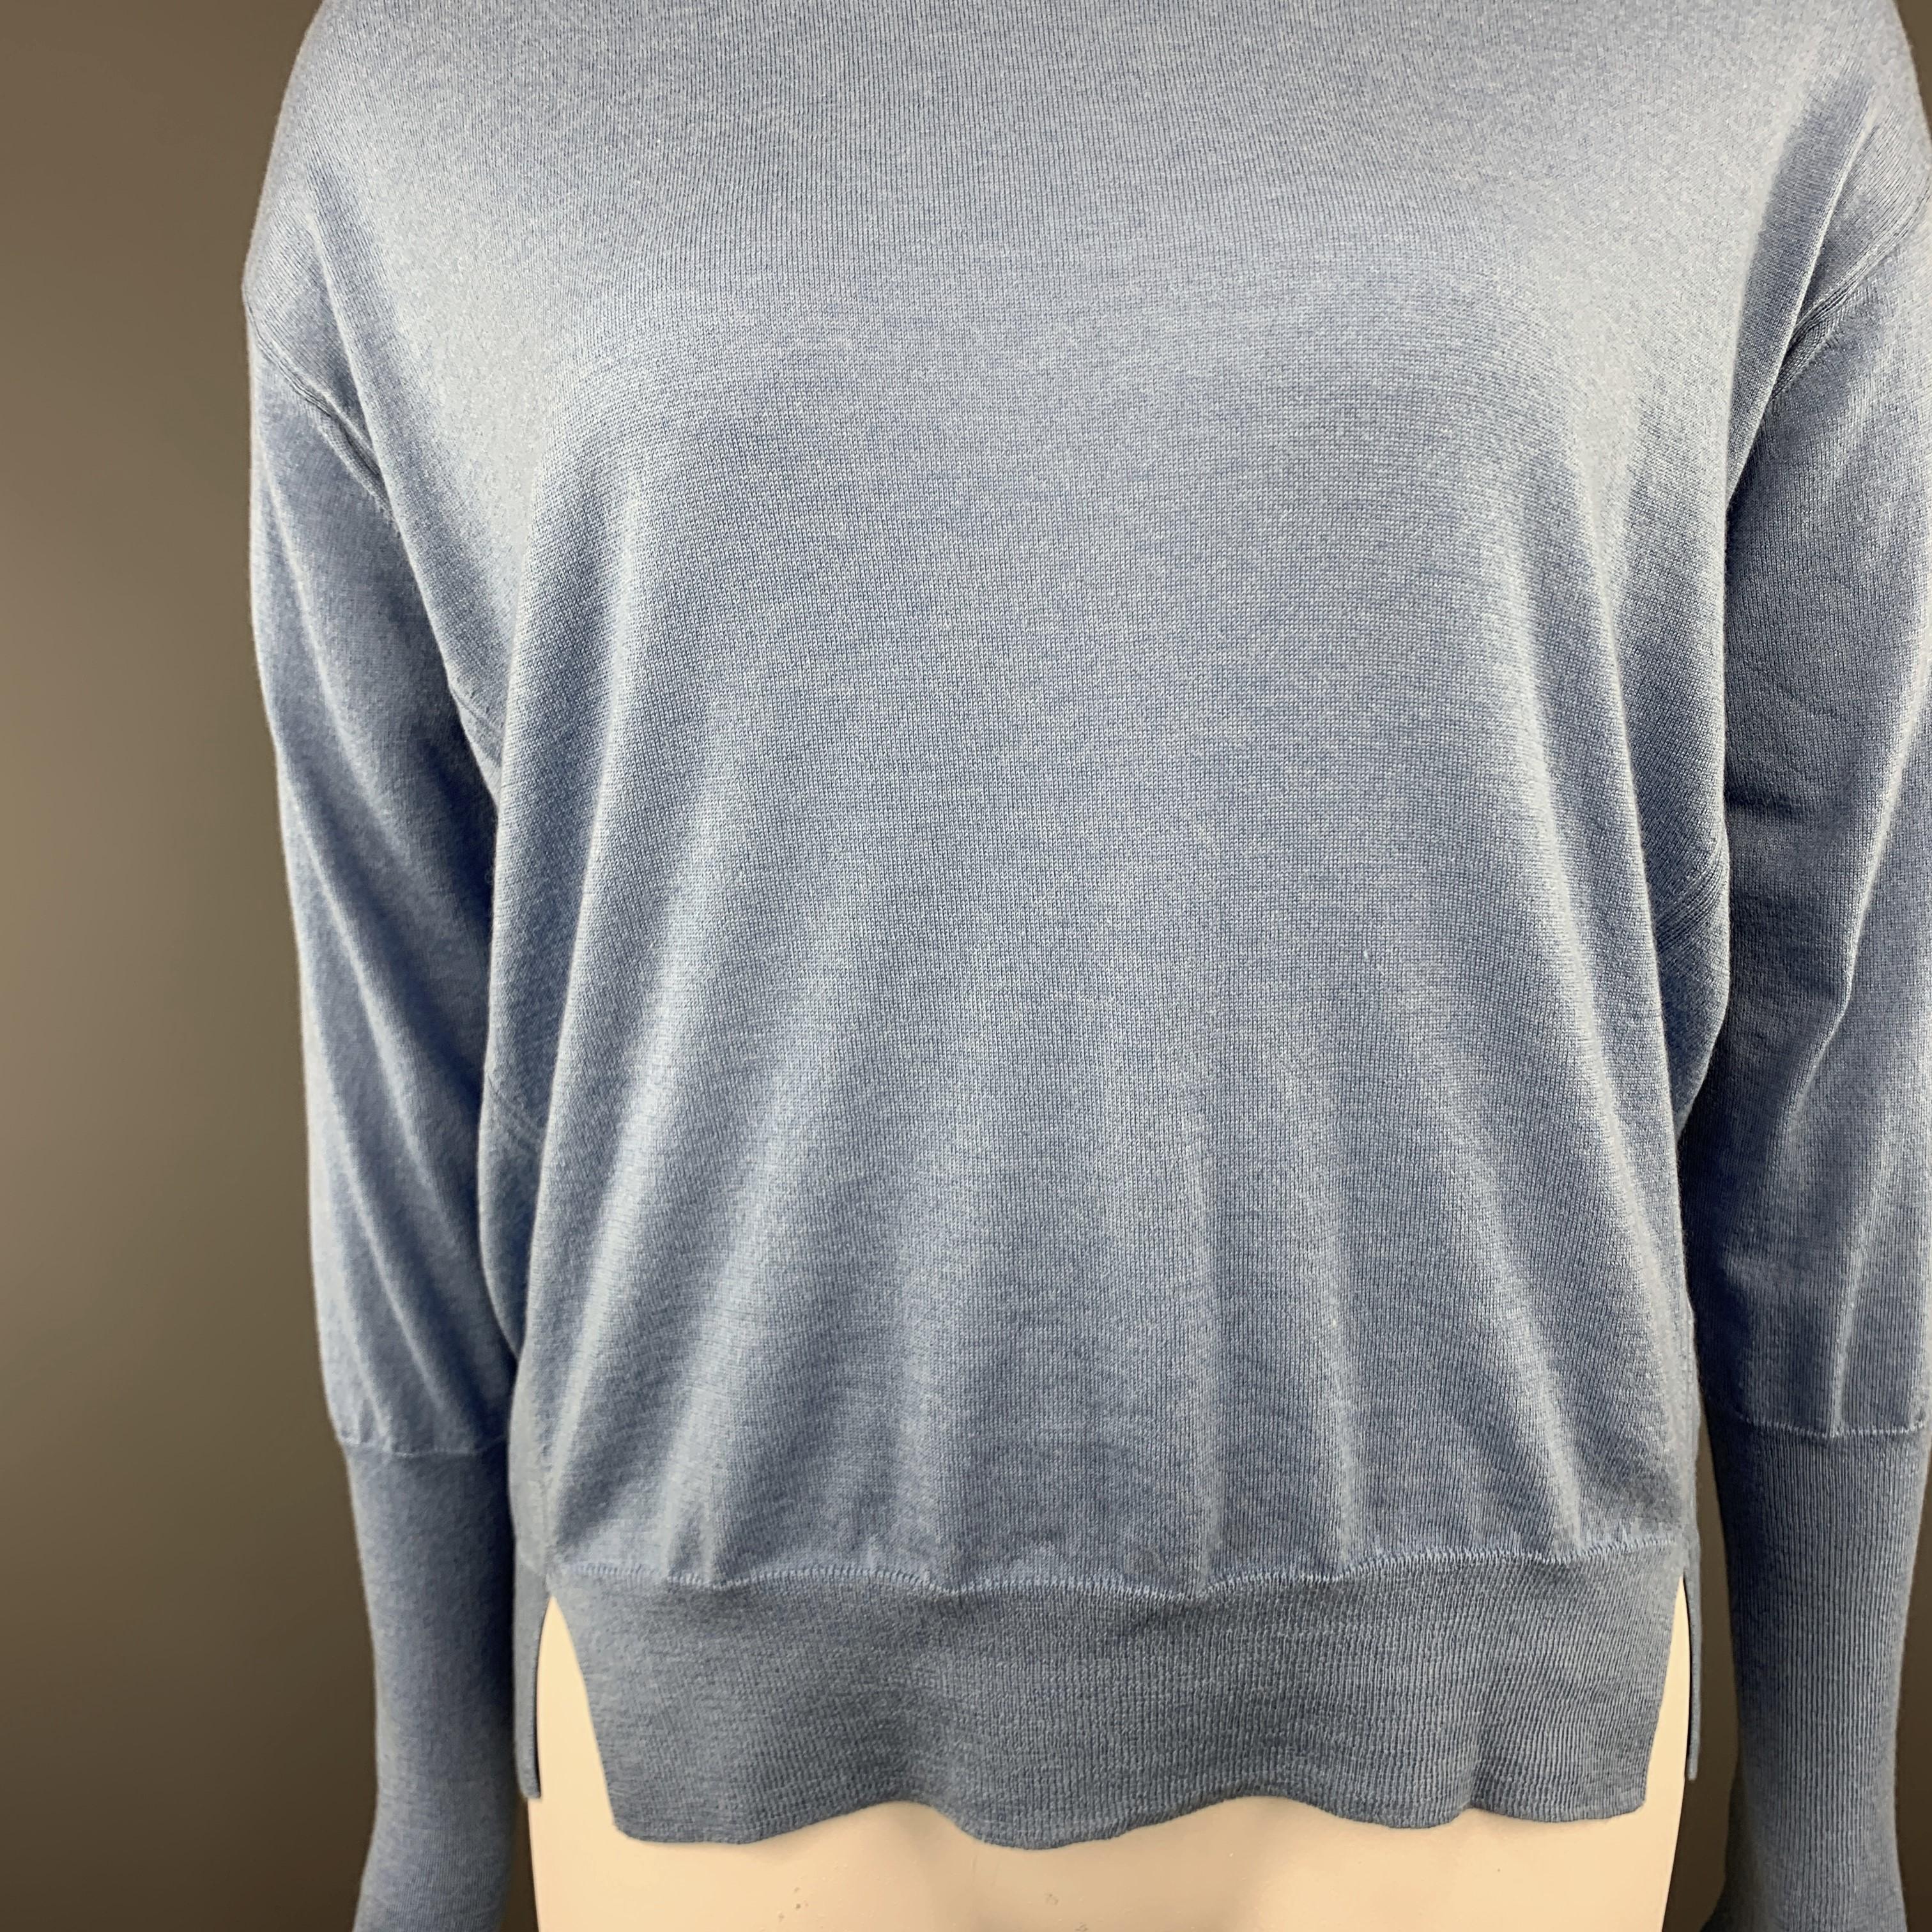 GIORGIO ARMANI pullover sweater comes in light blue cashmere knit with a round neck, slit waistband, and lone sleeves with extended cuff. Made in Italy.

Excellent Pre-Owned Condition.
Marked: EU 48

Measurements:

Shoulder: 23 in.
Bust: 50